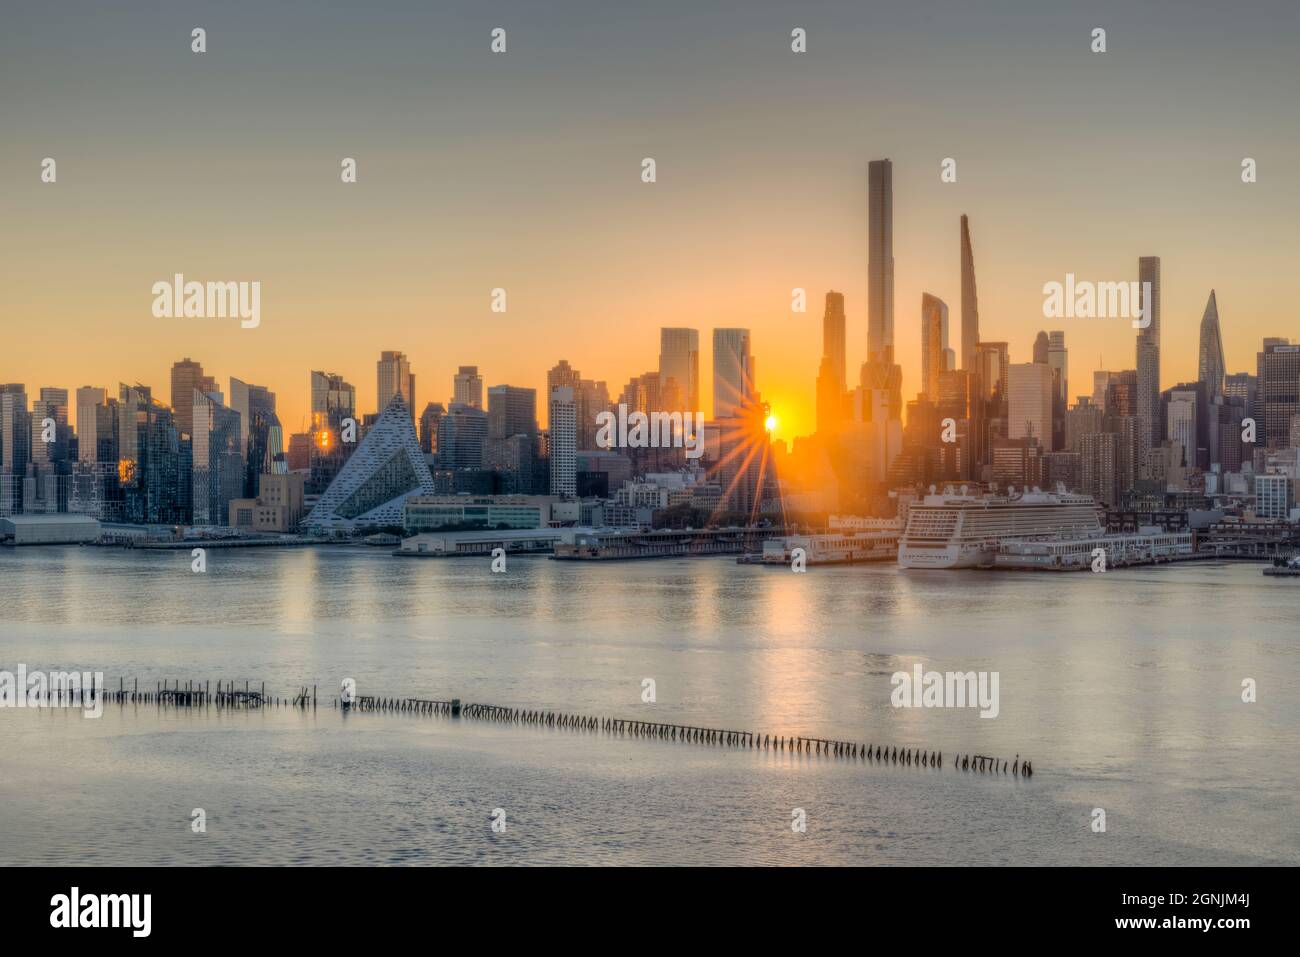 Sunrise in New York City, through buildings in the skyline on the West Side of Manhattan, as viewed over the Hudson River from New Jersey. Stock Photo